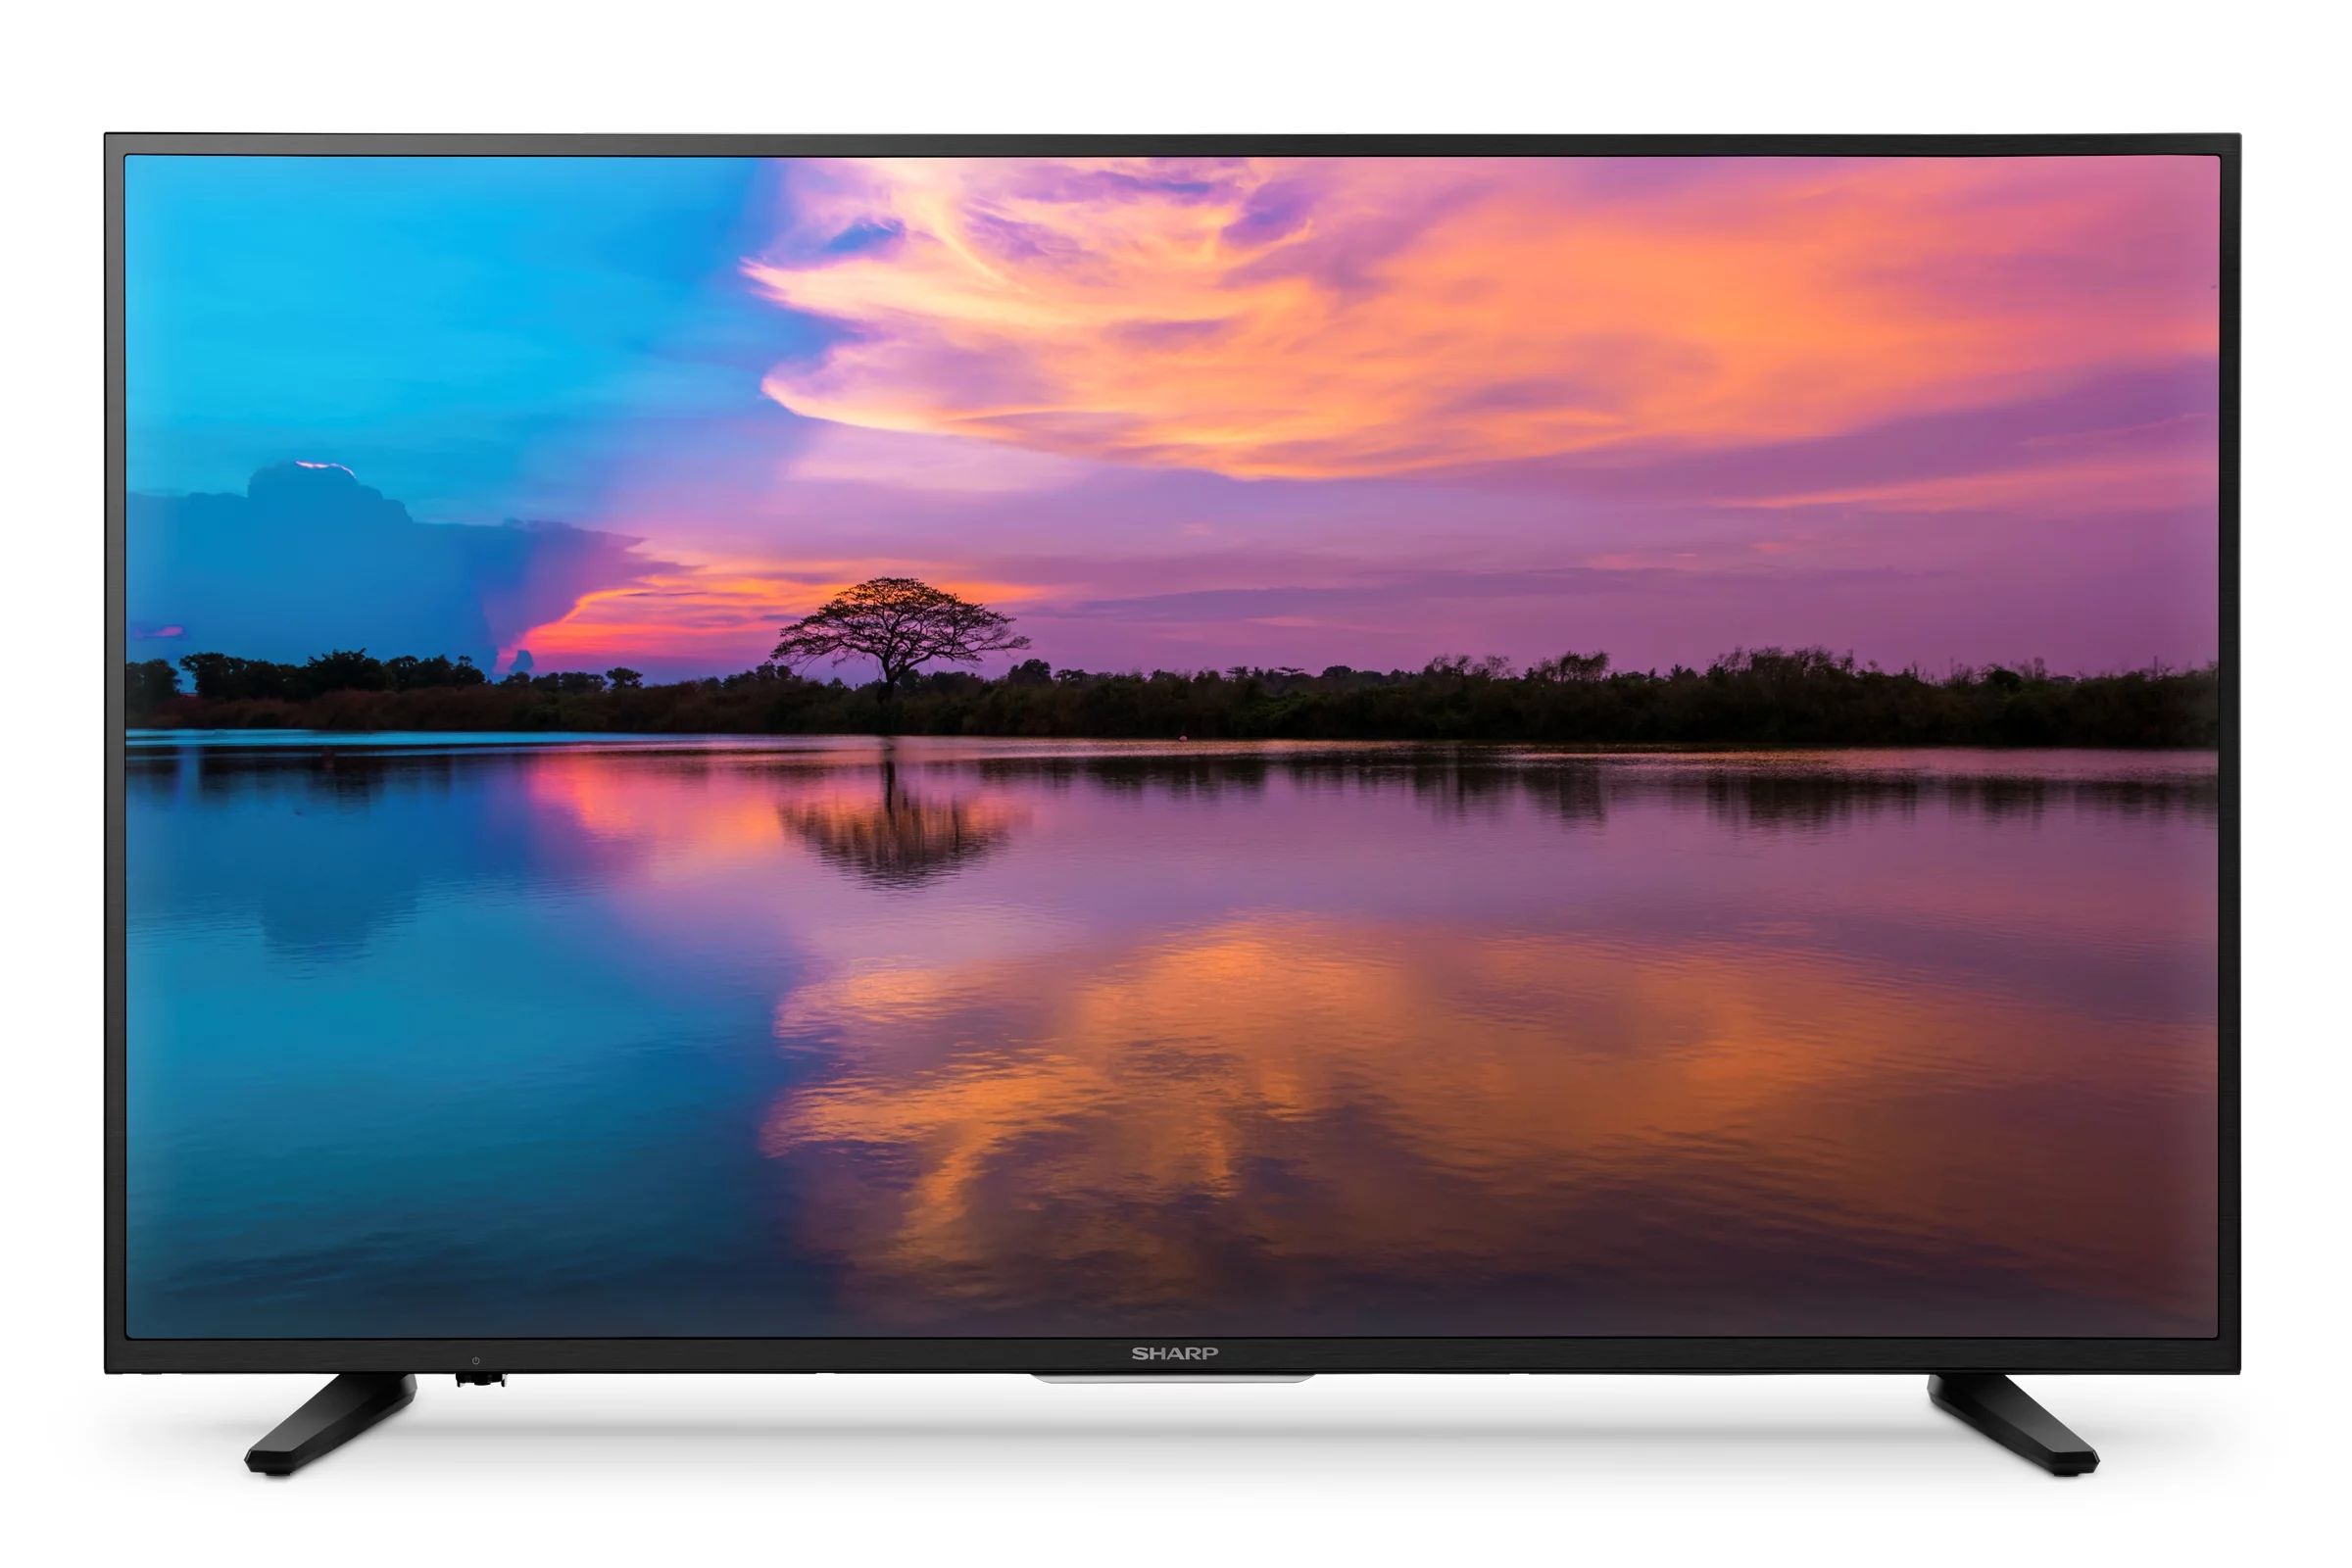 what-is-the-dimension-of-the-box-that-holds-sharp-55-class-4k-2160p-smart-led-tv-lc-55n7000u